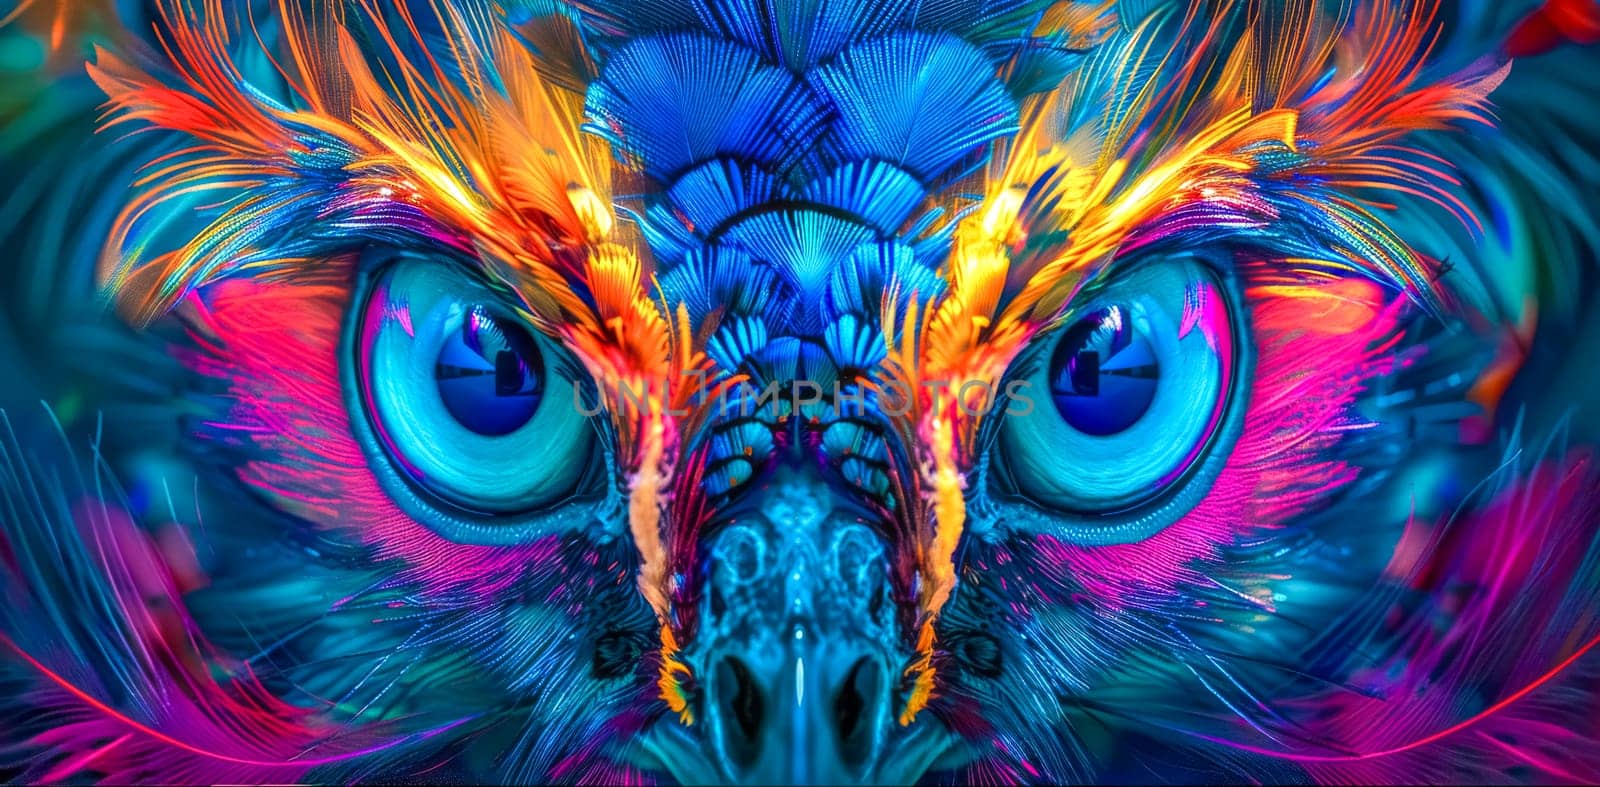 Vibrant feathered symmetry with intense eyes by Edophoto